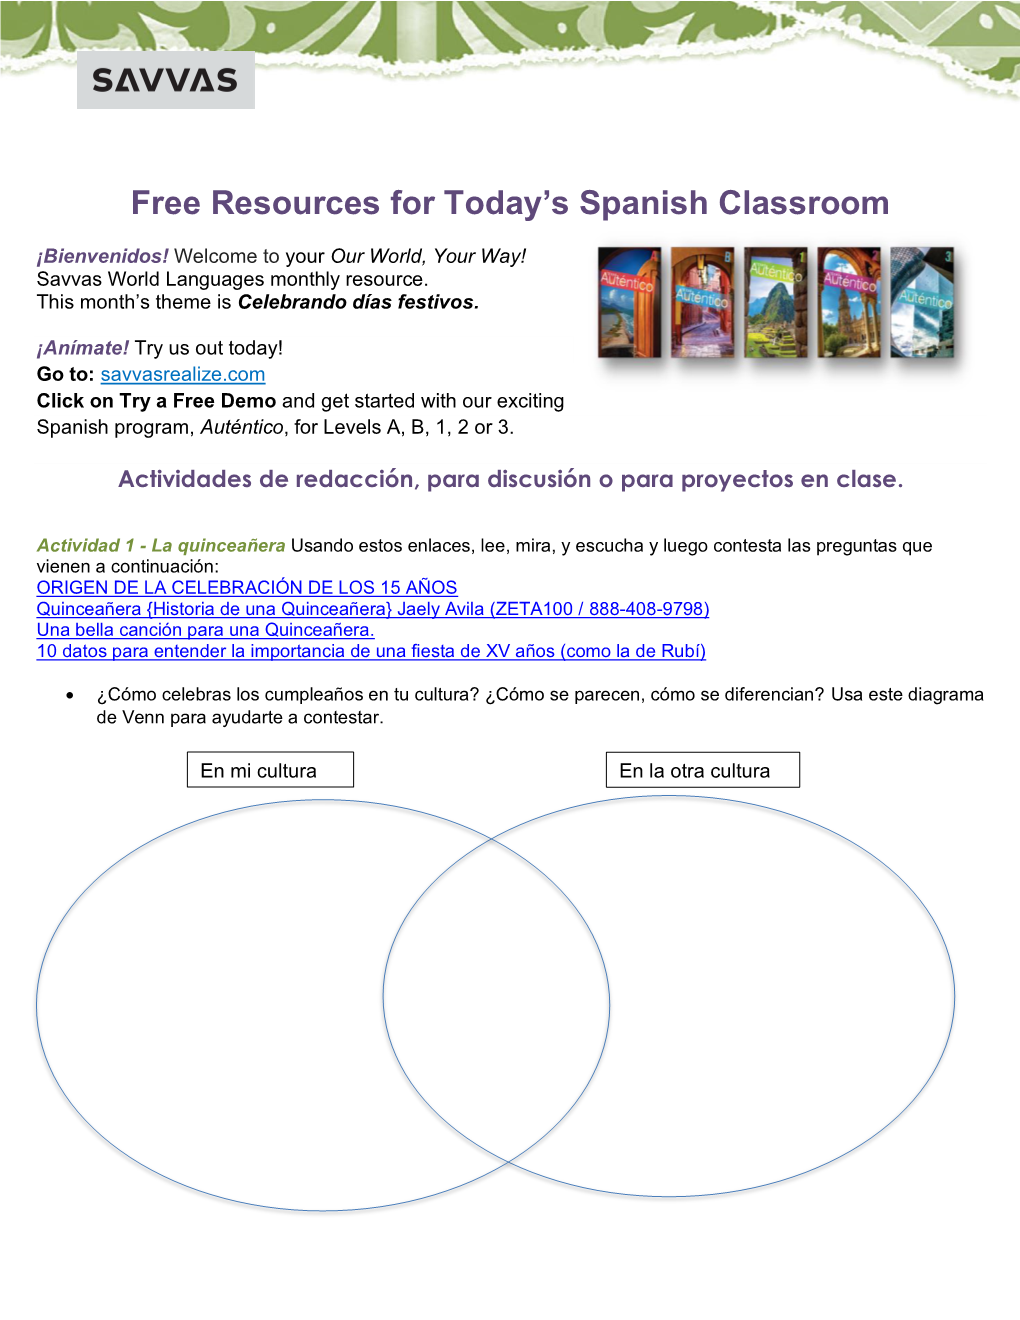 Free Resources for Today's Spanish Classroom